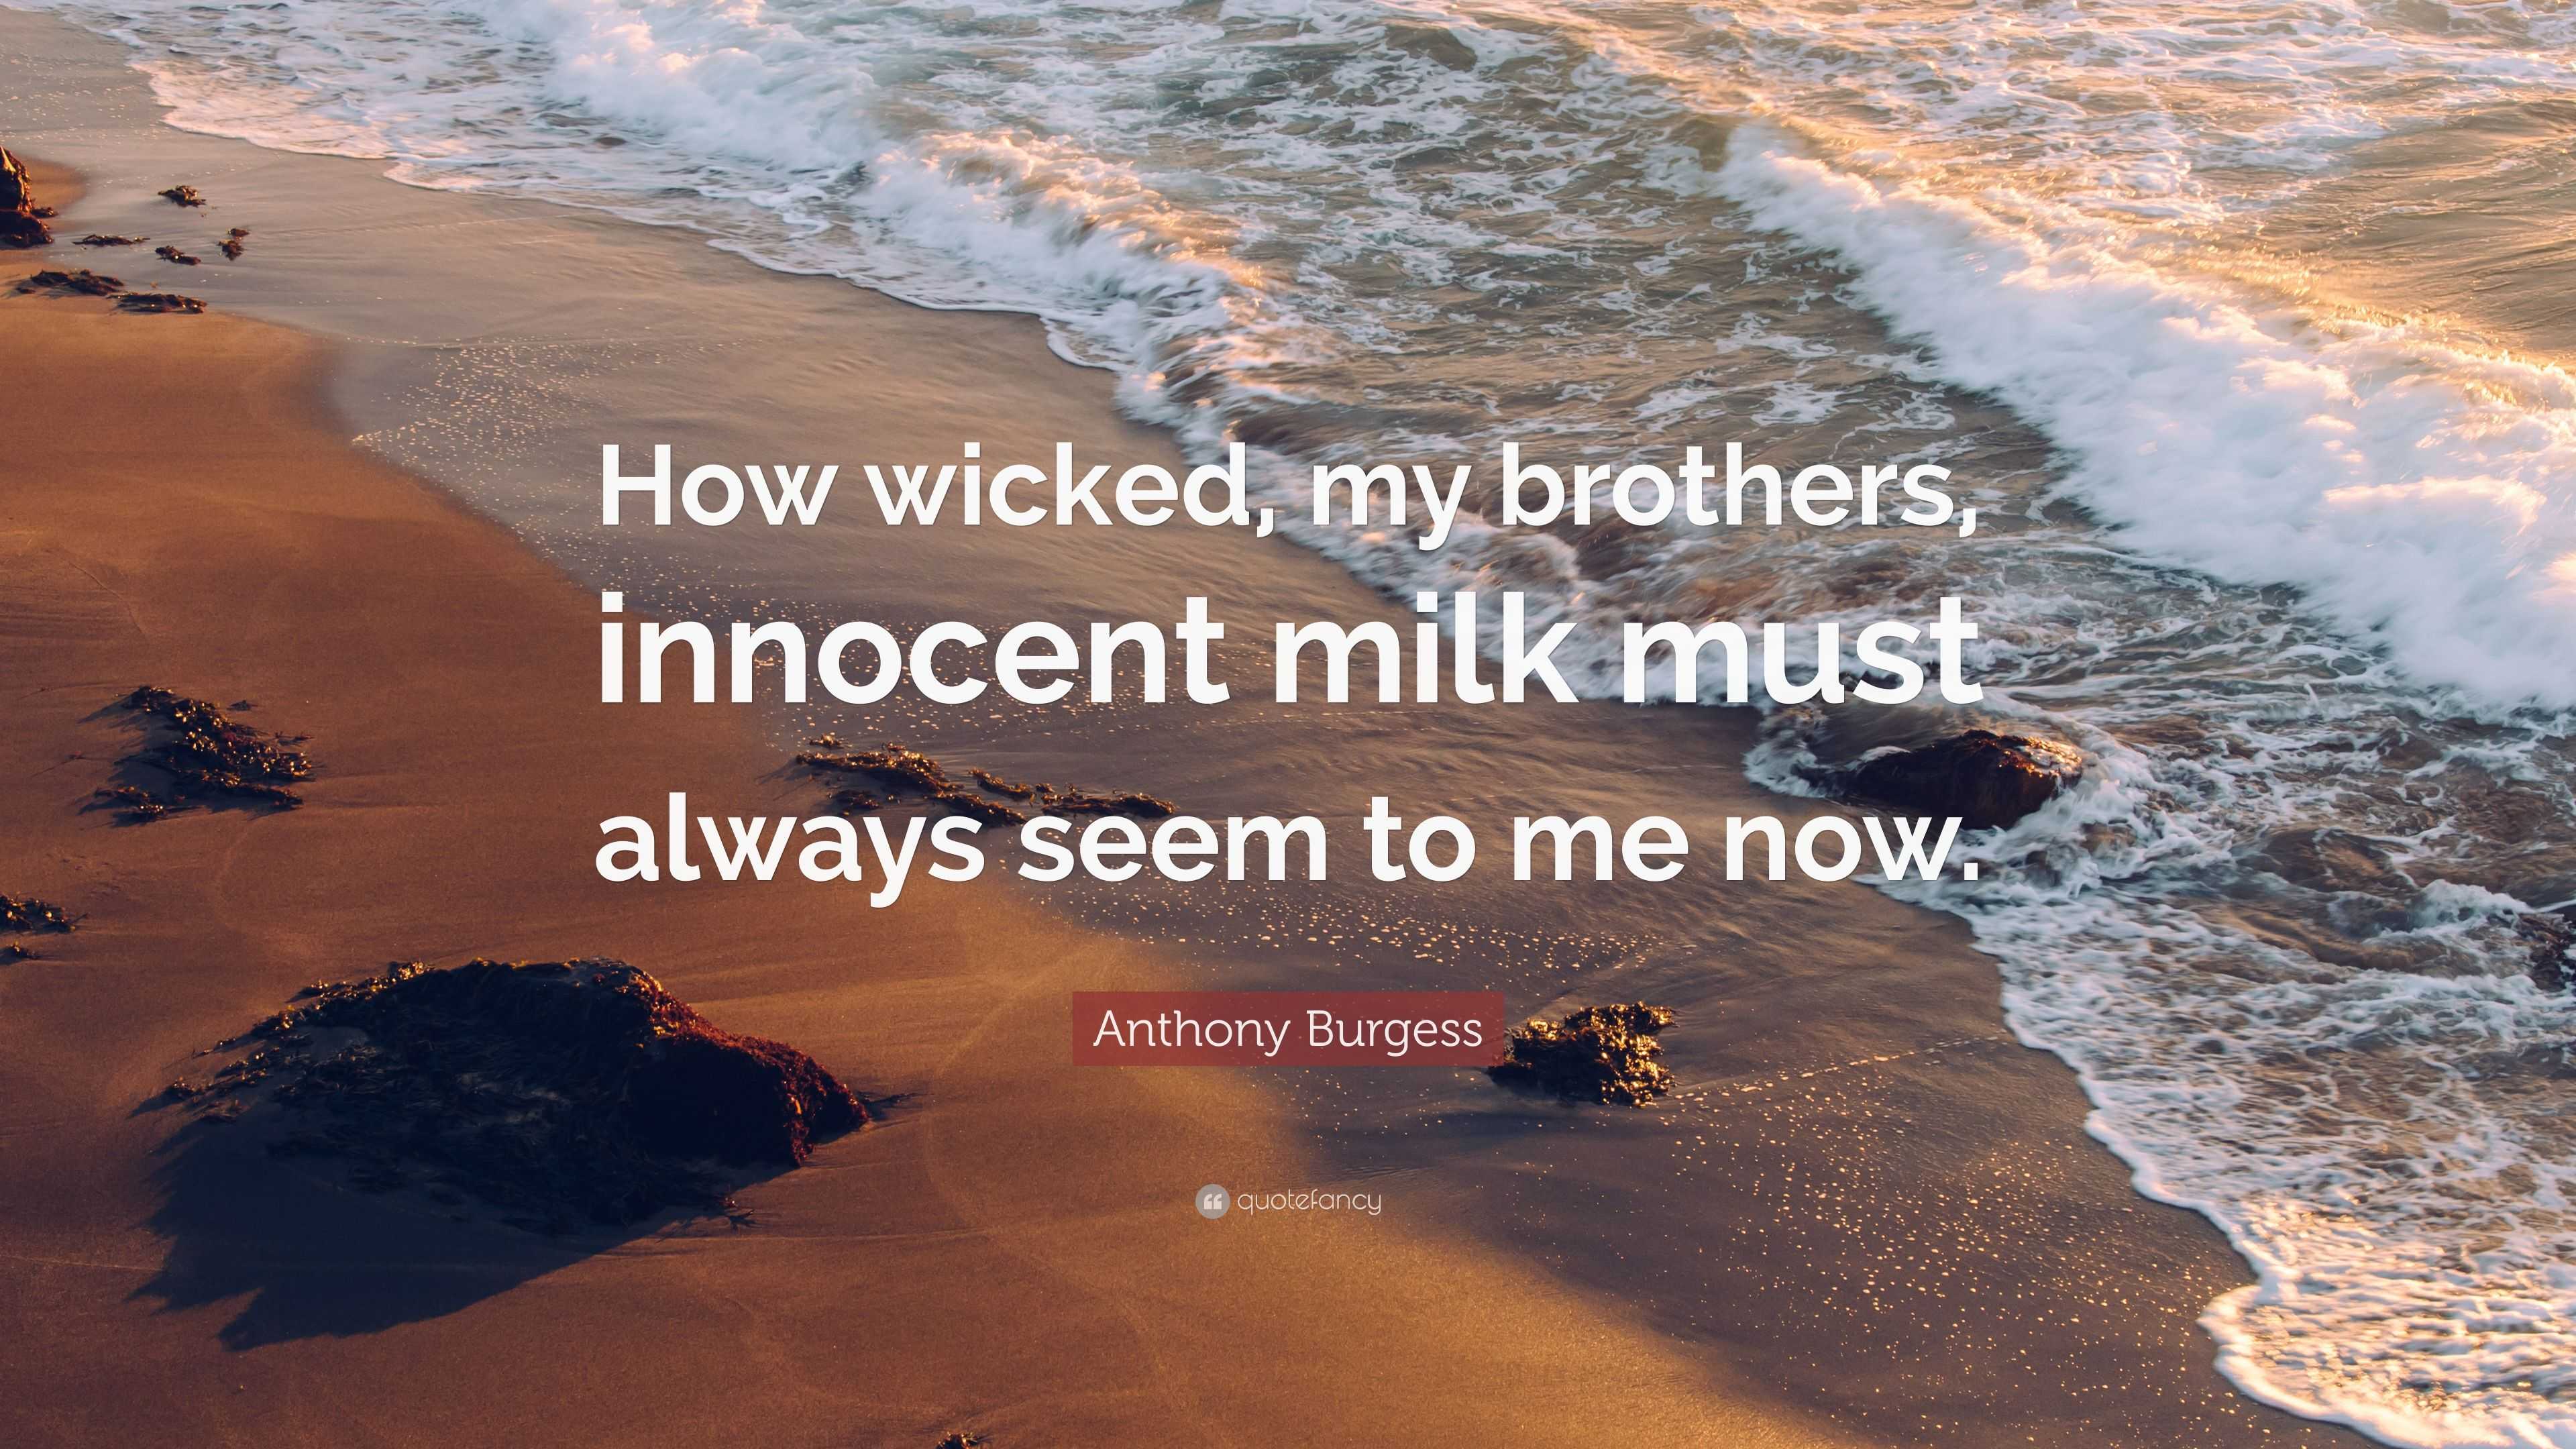 https://quotefancy.com/media/wallpaper/3840x2160/5020410-Anthony-Burgess-Quote-How-wicked-my-brothers-innocent-milk-must.jpg